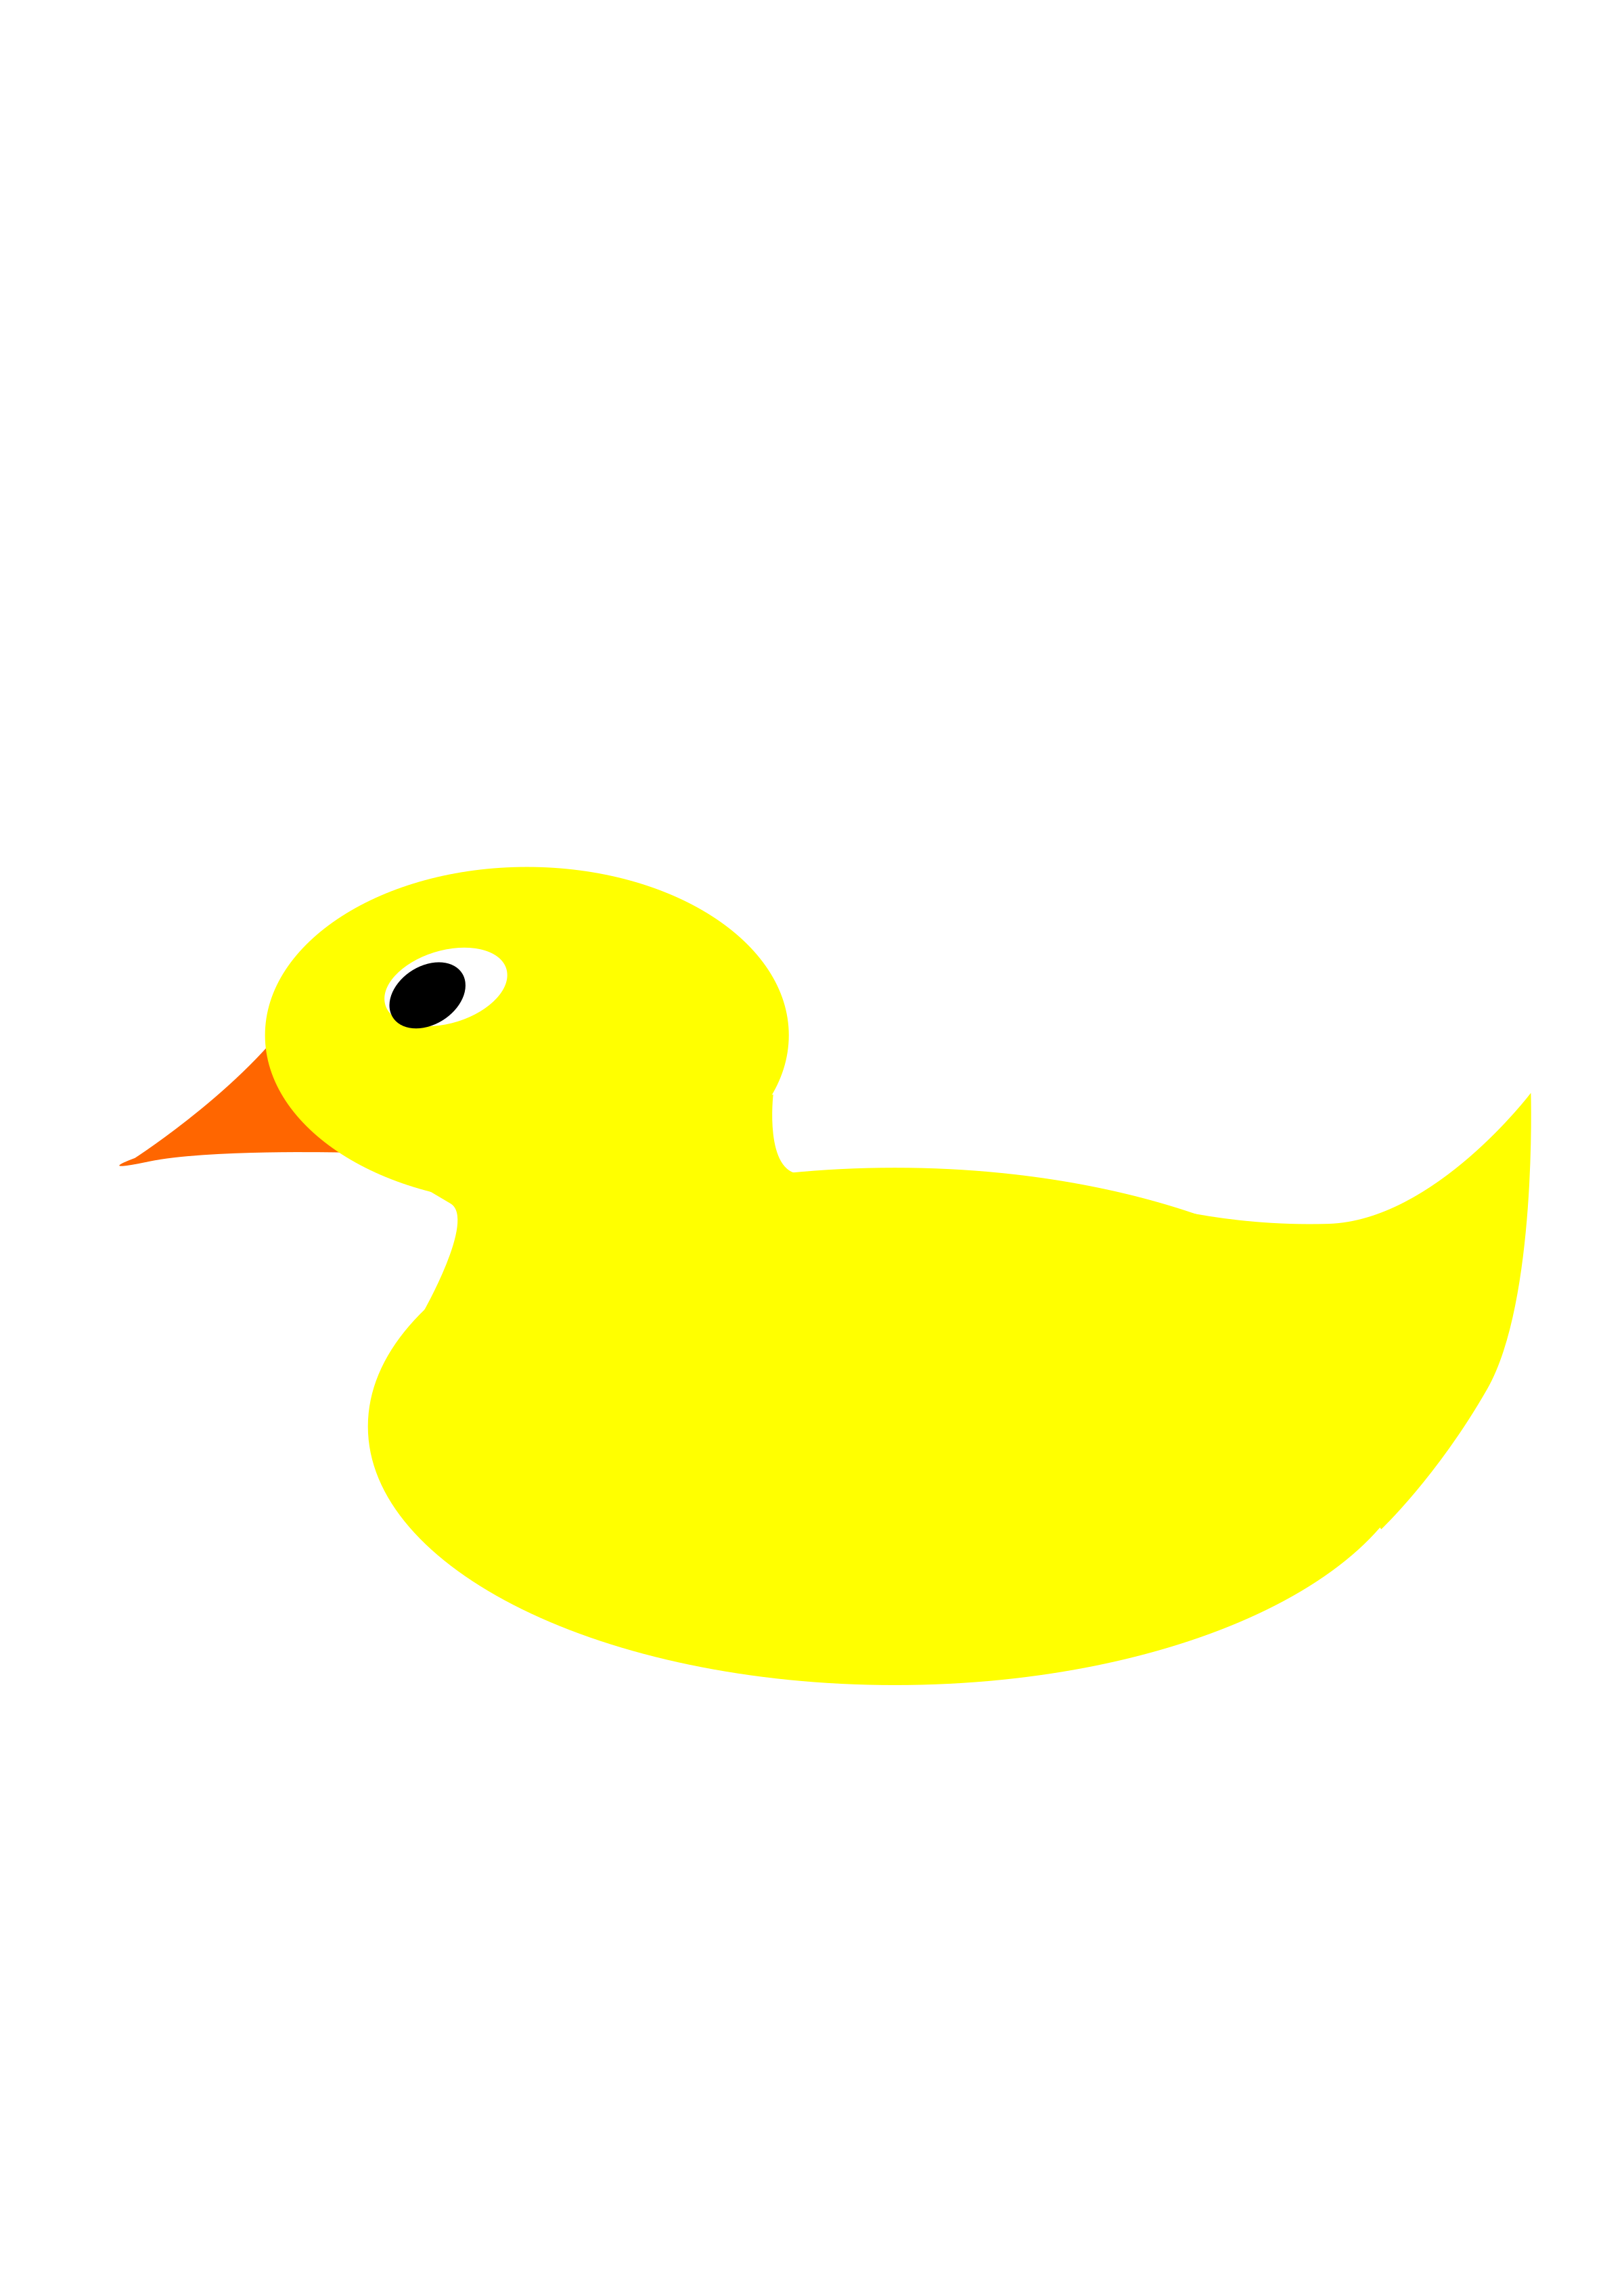 Ducks clipart simple. Rubber ducky icons png